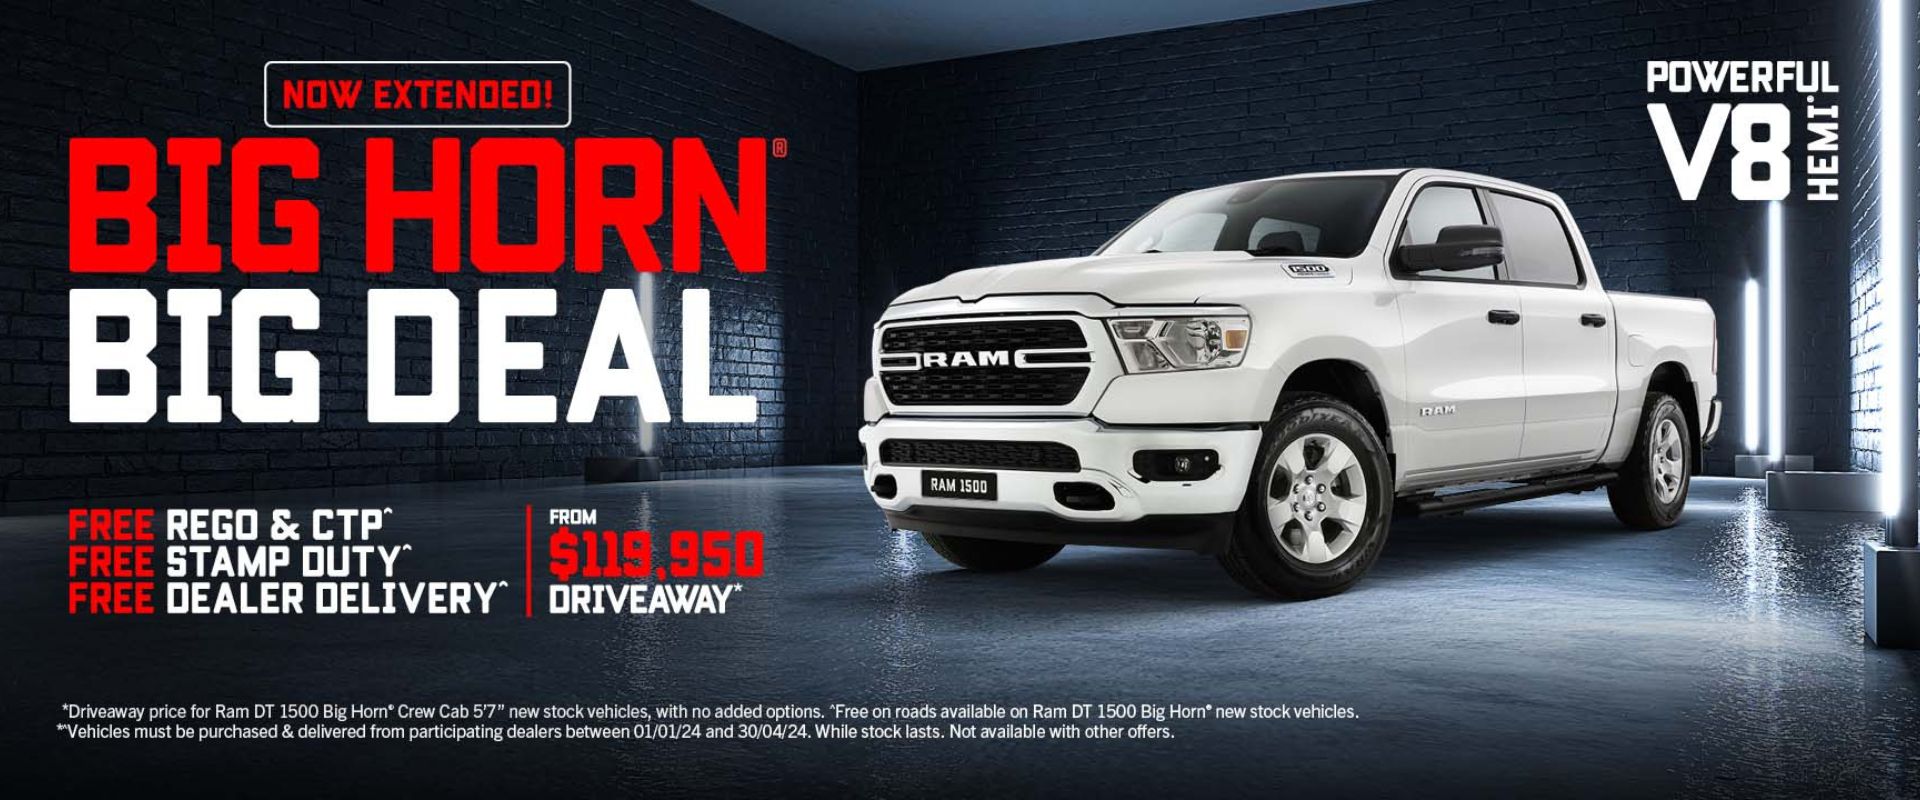 Big Horn Big Deal NOW EXTENDED - BIG HORN BIG DEAL. The Ram 1500 Big Horn is available with free rego, CTP, stamp duty and dealer delivery.